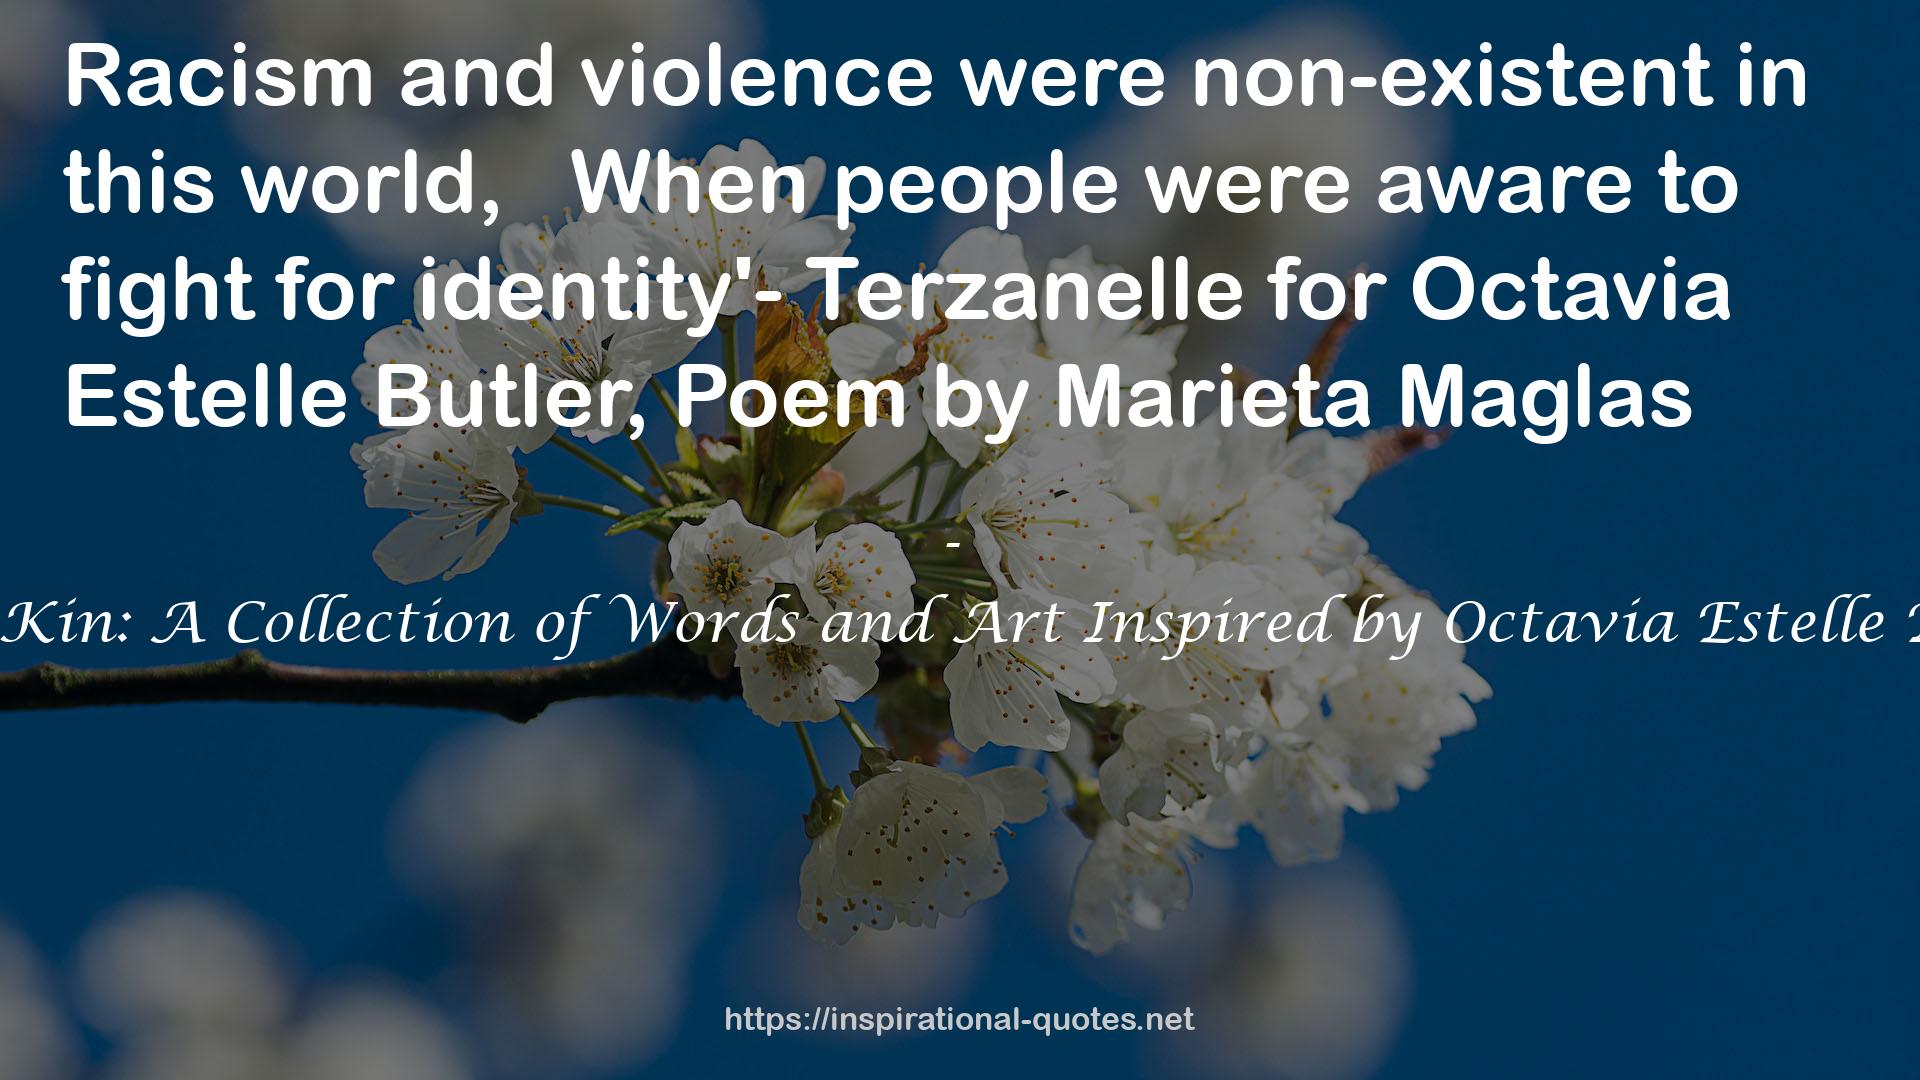 Near Kin: A Collection of Words and Art Inspired by Octavia Estelle Butler QUOTES